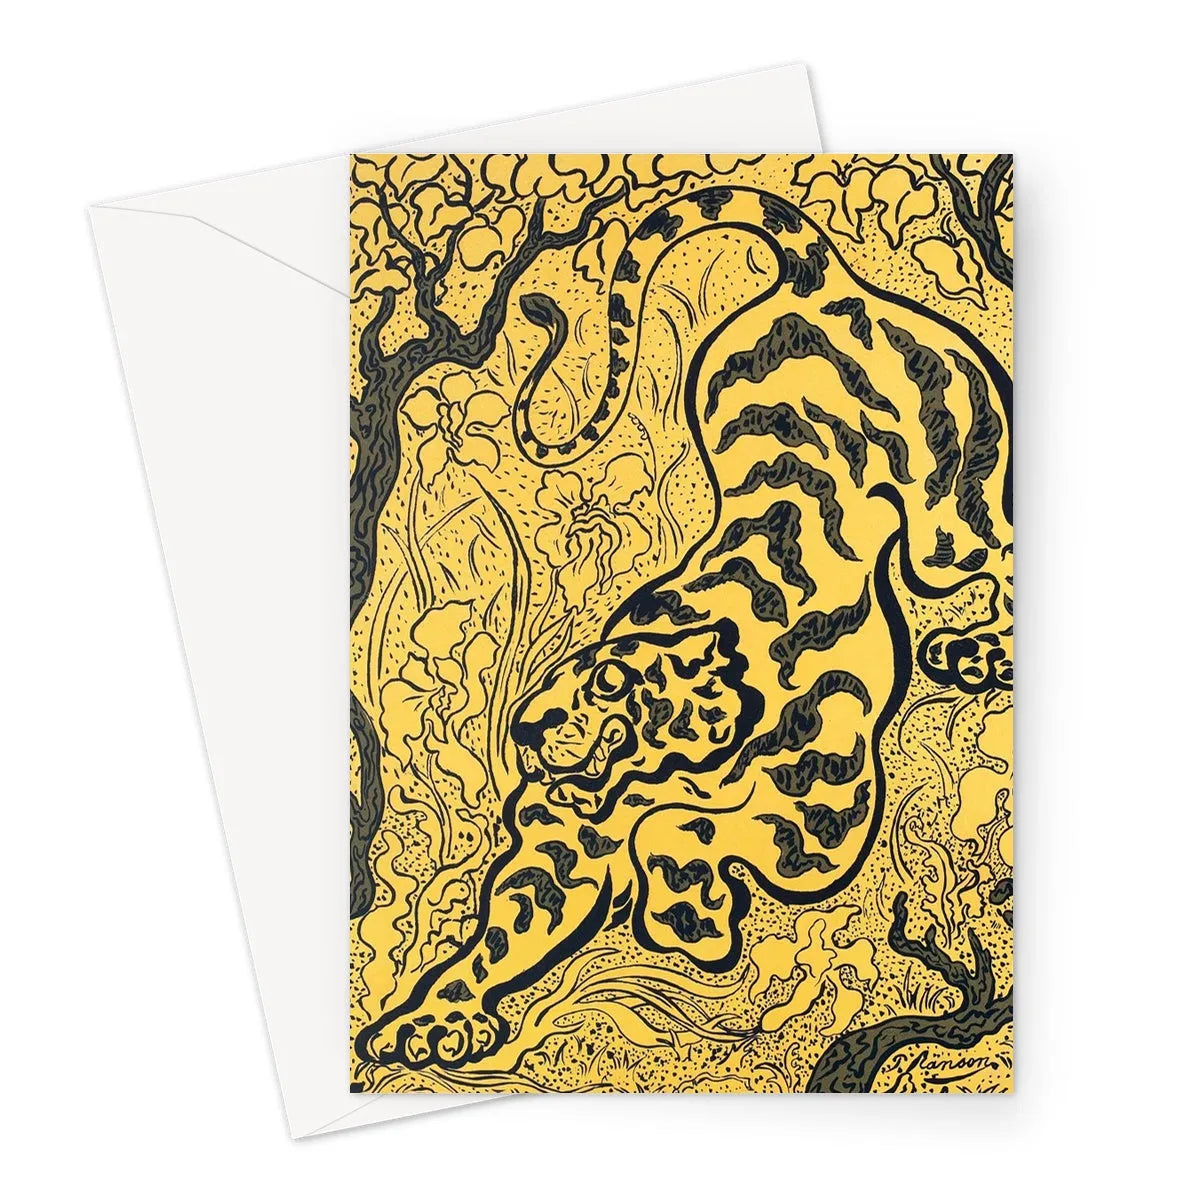 Tiger In The Jungle By Paul Ranson Greeting Card - A5 Portrait / 1 Card - Greeting & Note Cards - Aesthetic Art